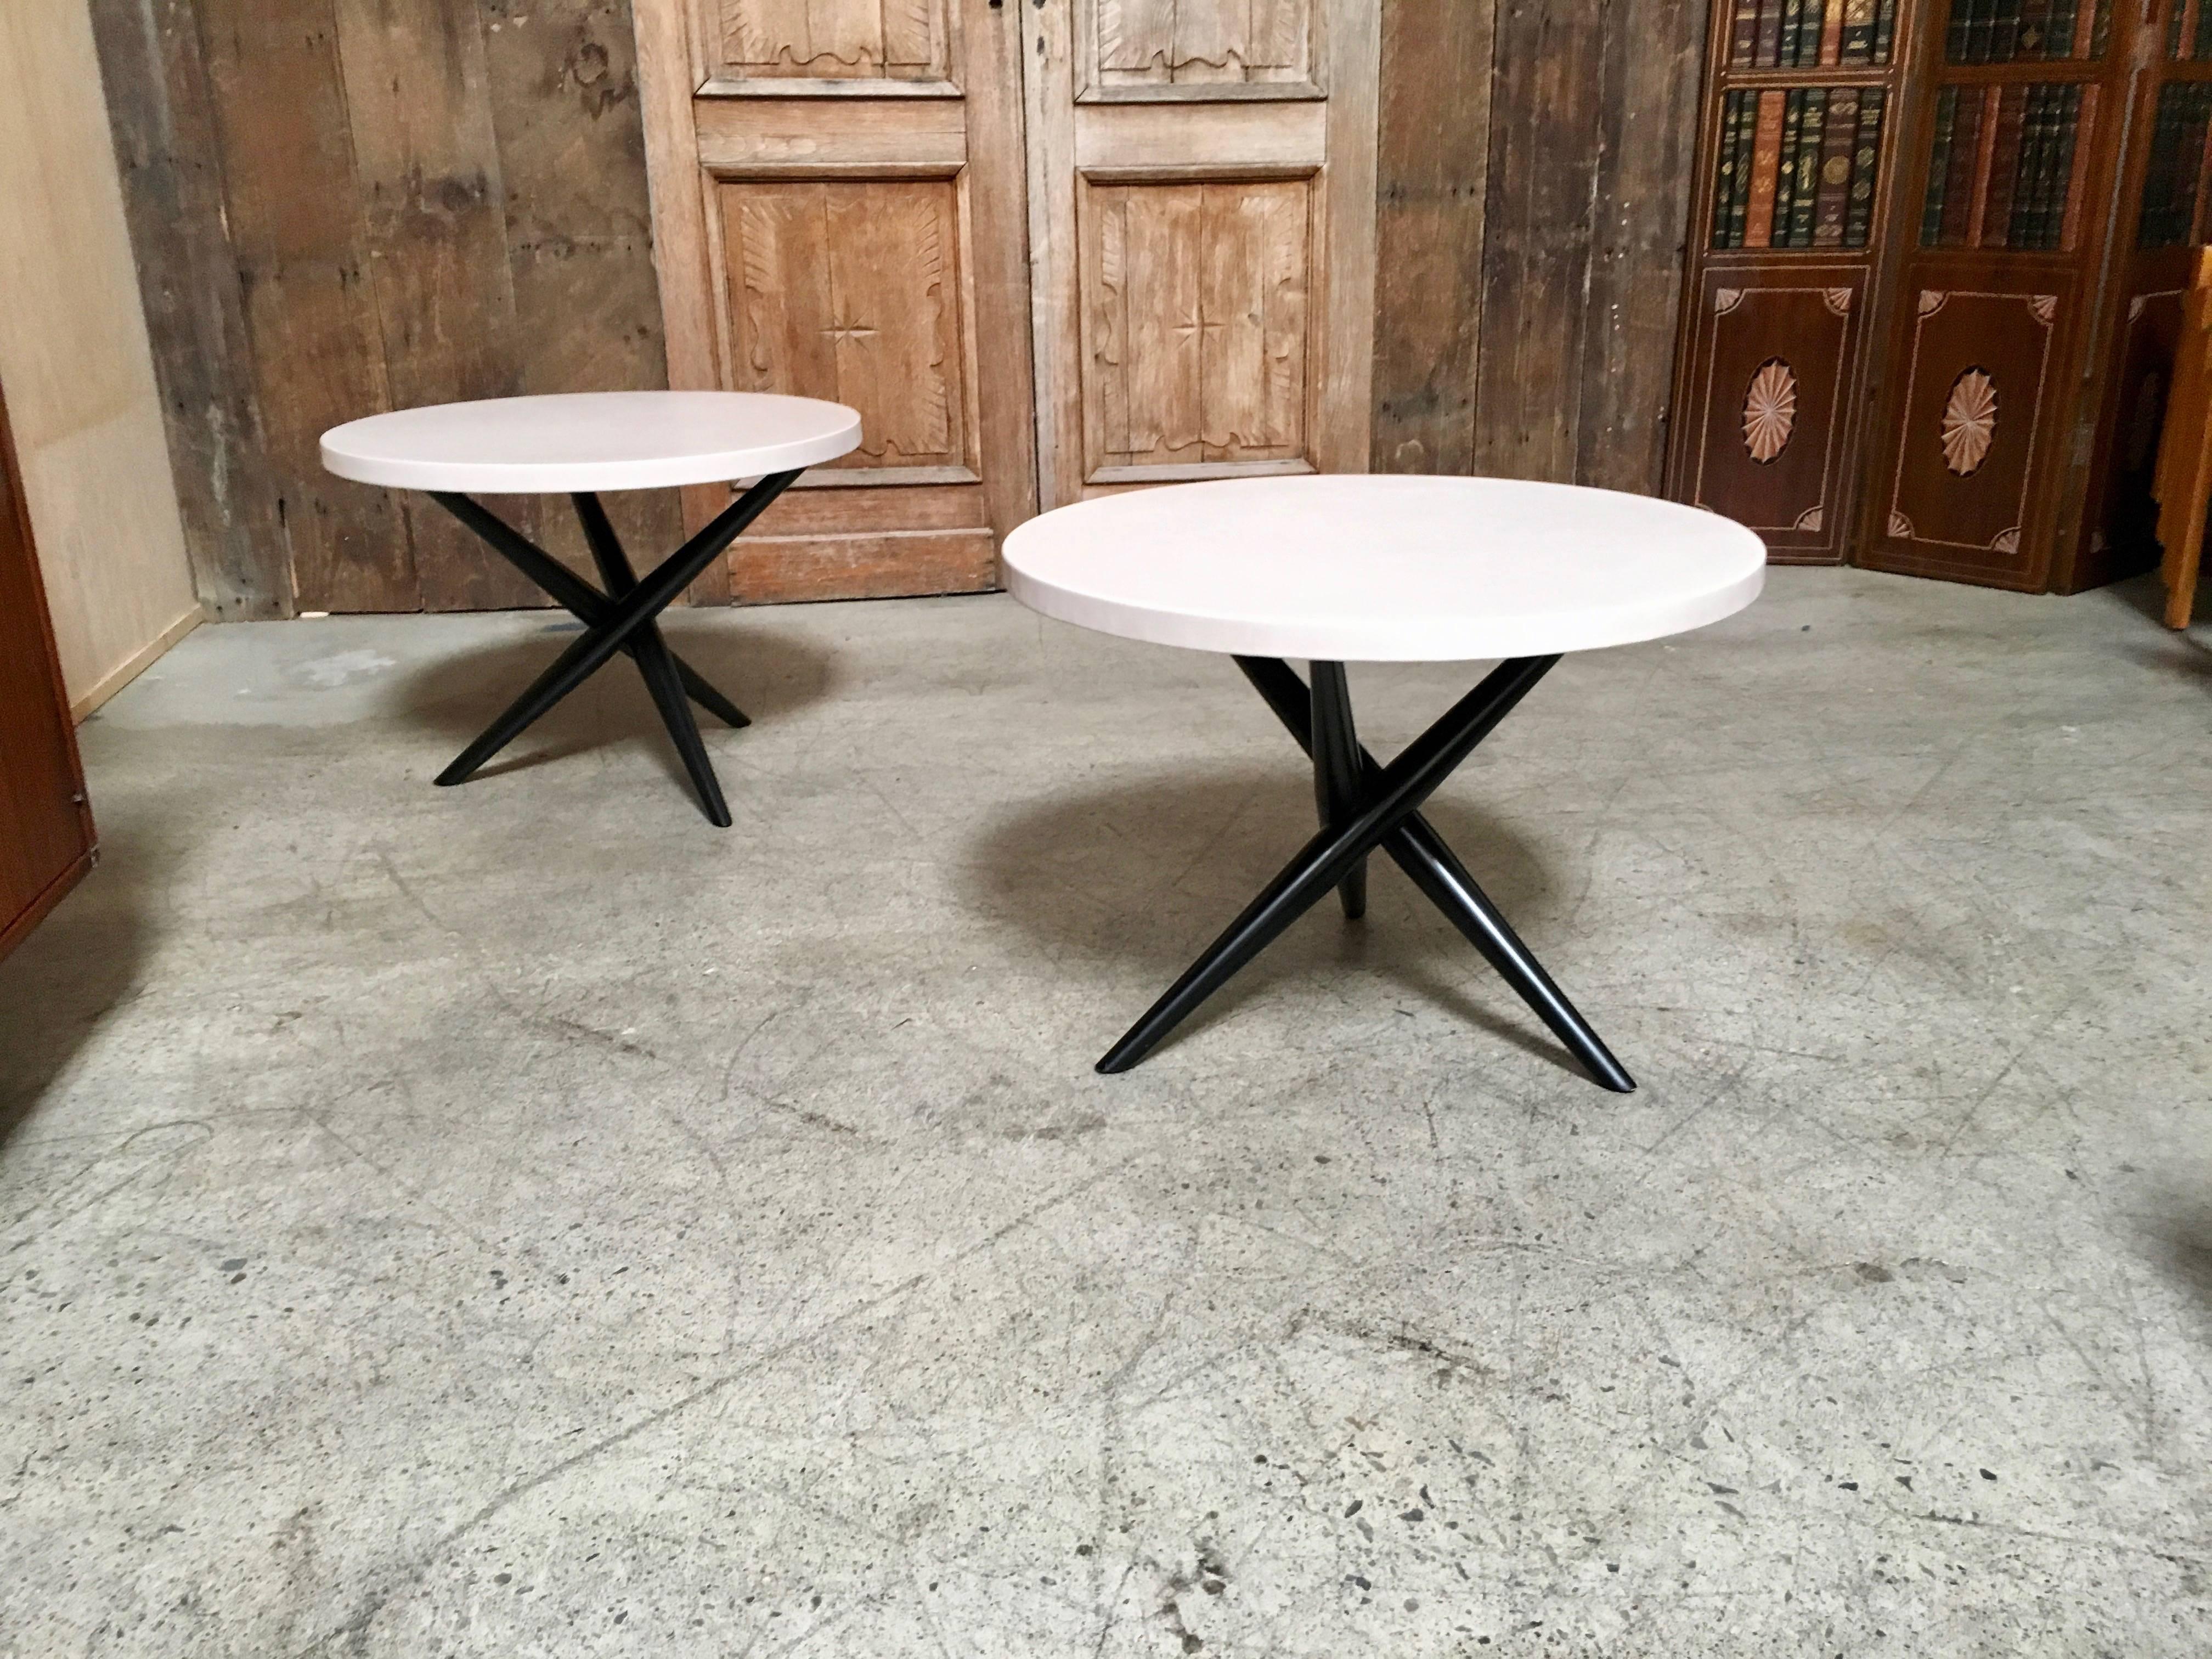 Pair of jax tables with ebonized base and creamy ivory leather top.